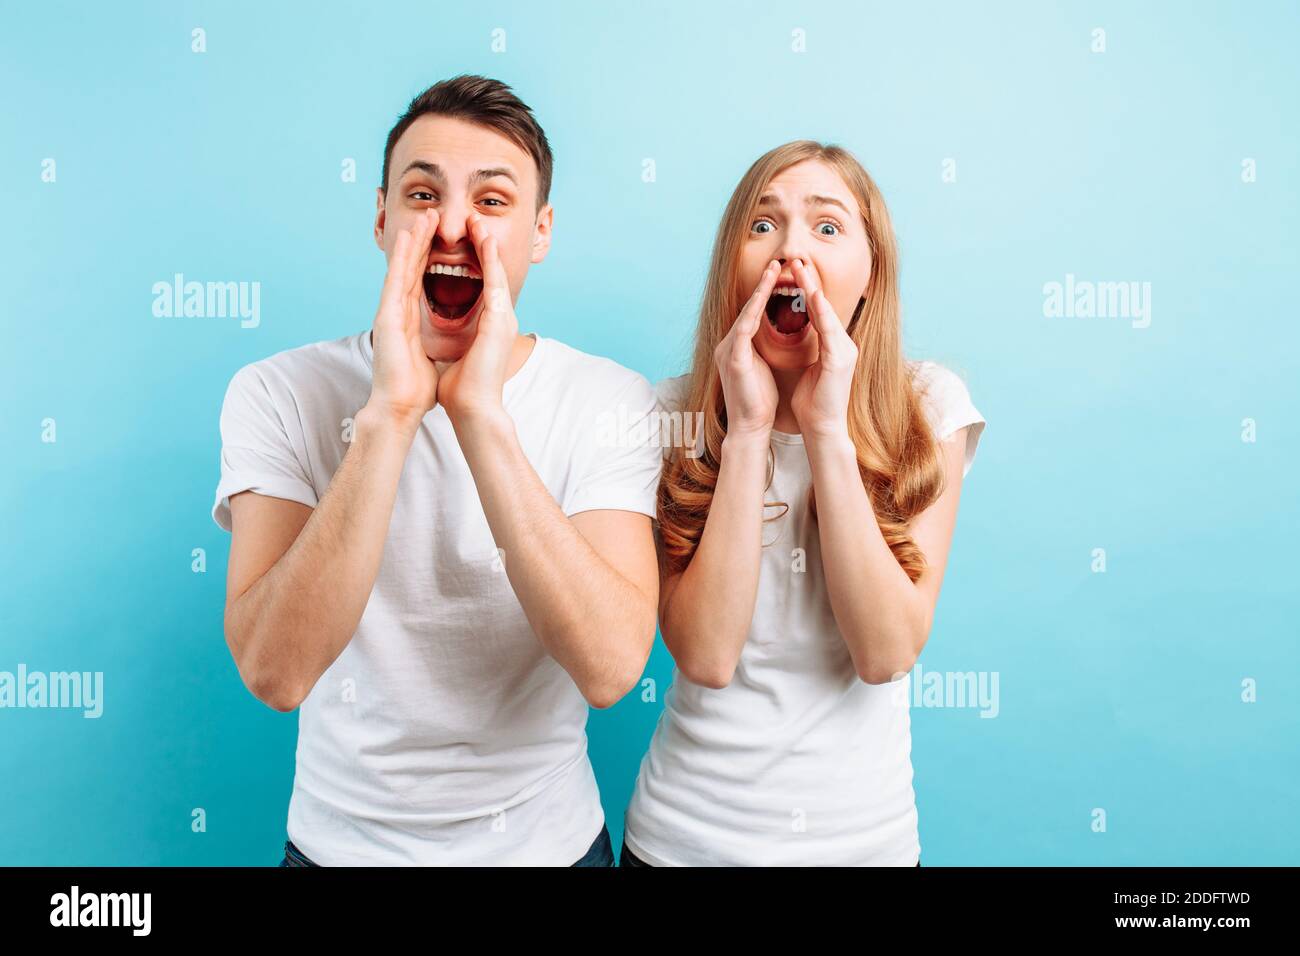 Portrait of a young couple man and woman screaming and look into the camera, against a blue background Stock Photo